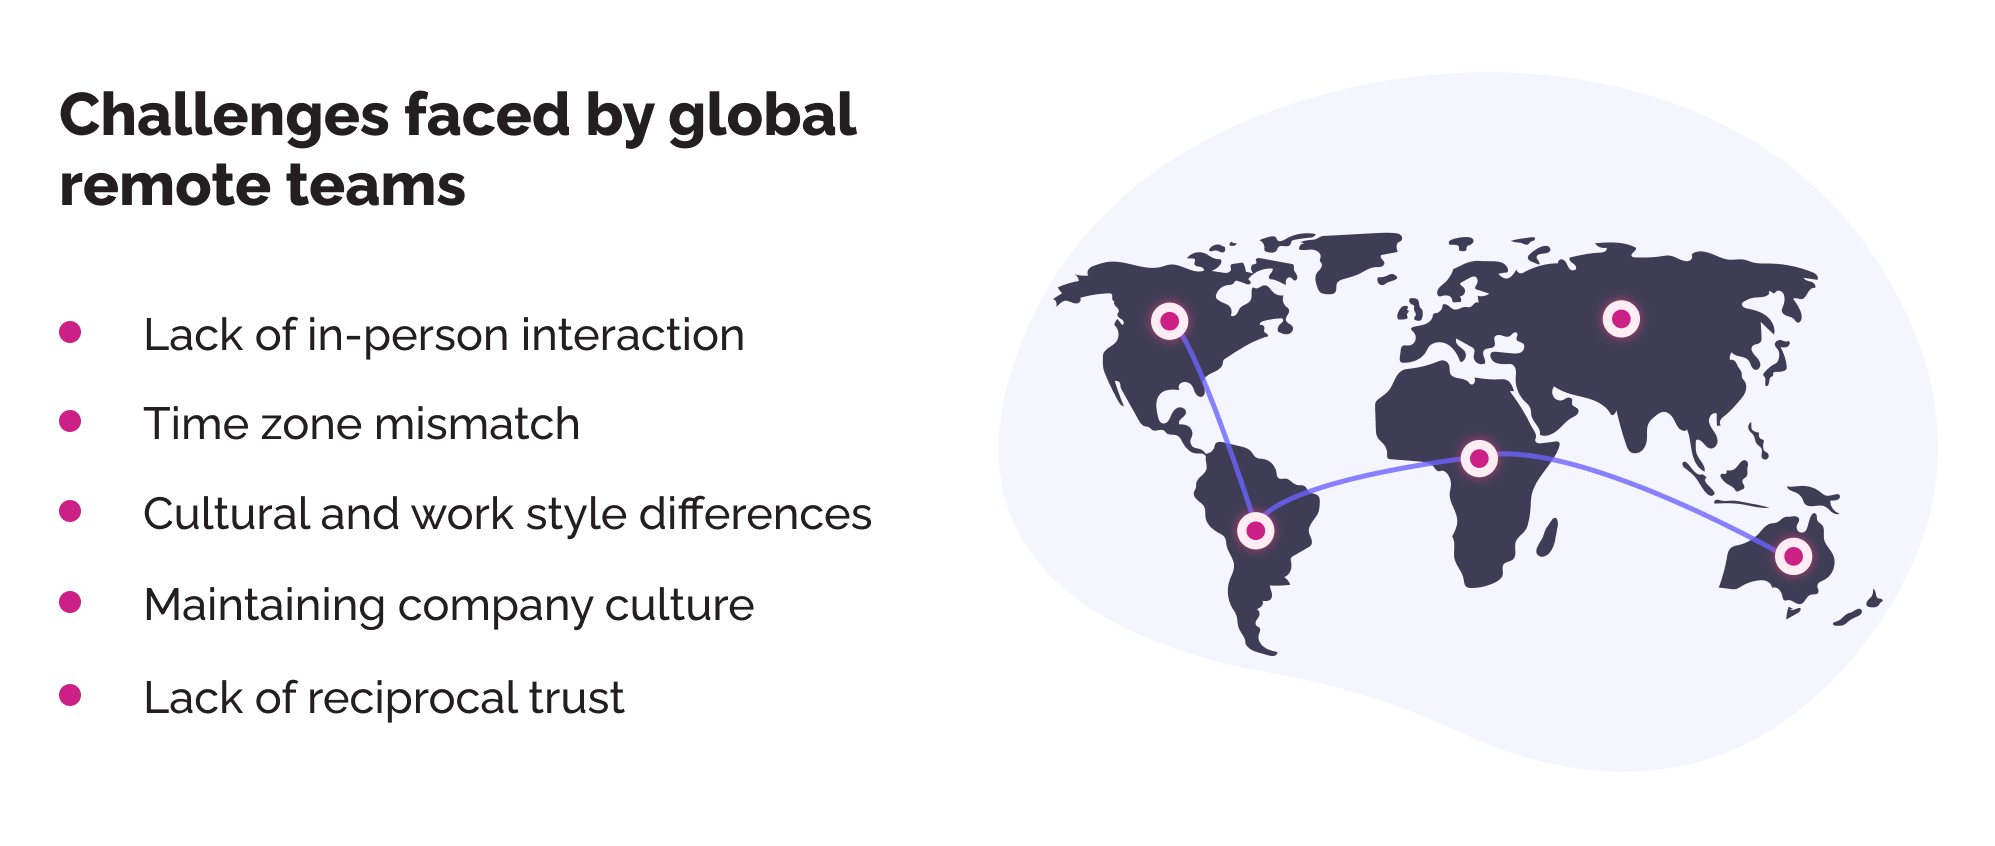 List of challenges faced by global remote teams and world map illustration.